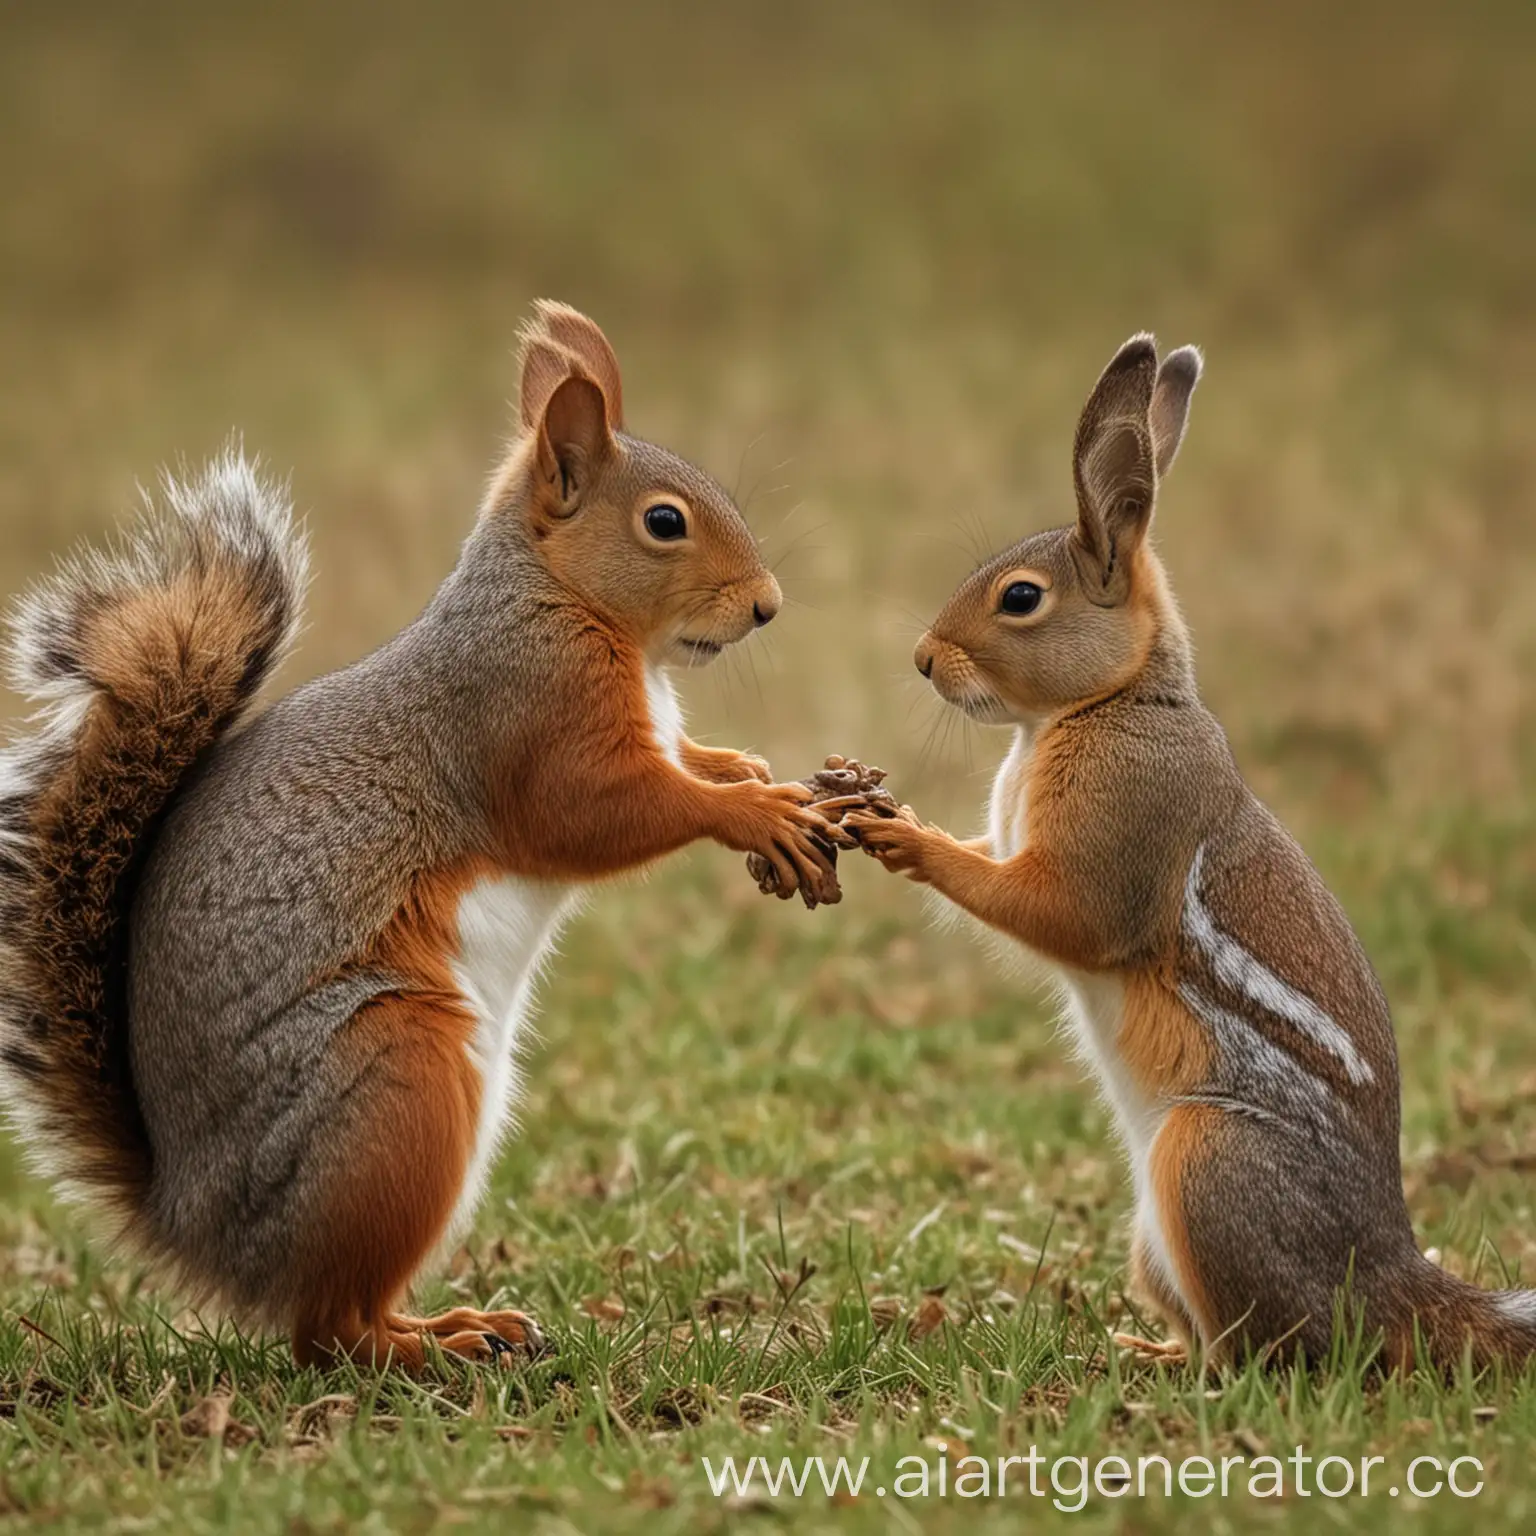 Adorable-Squirrel-and-Hare-Delightful-Friendship-Captured-in-Nature